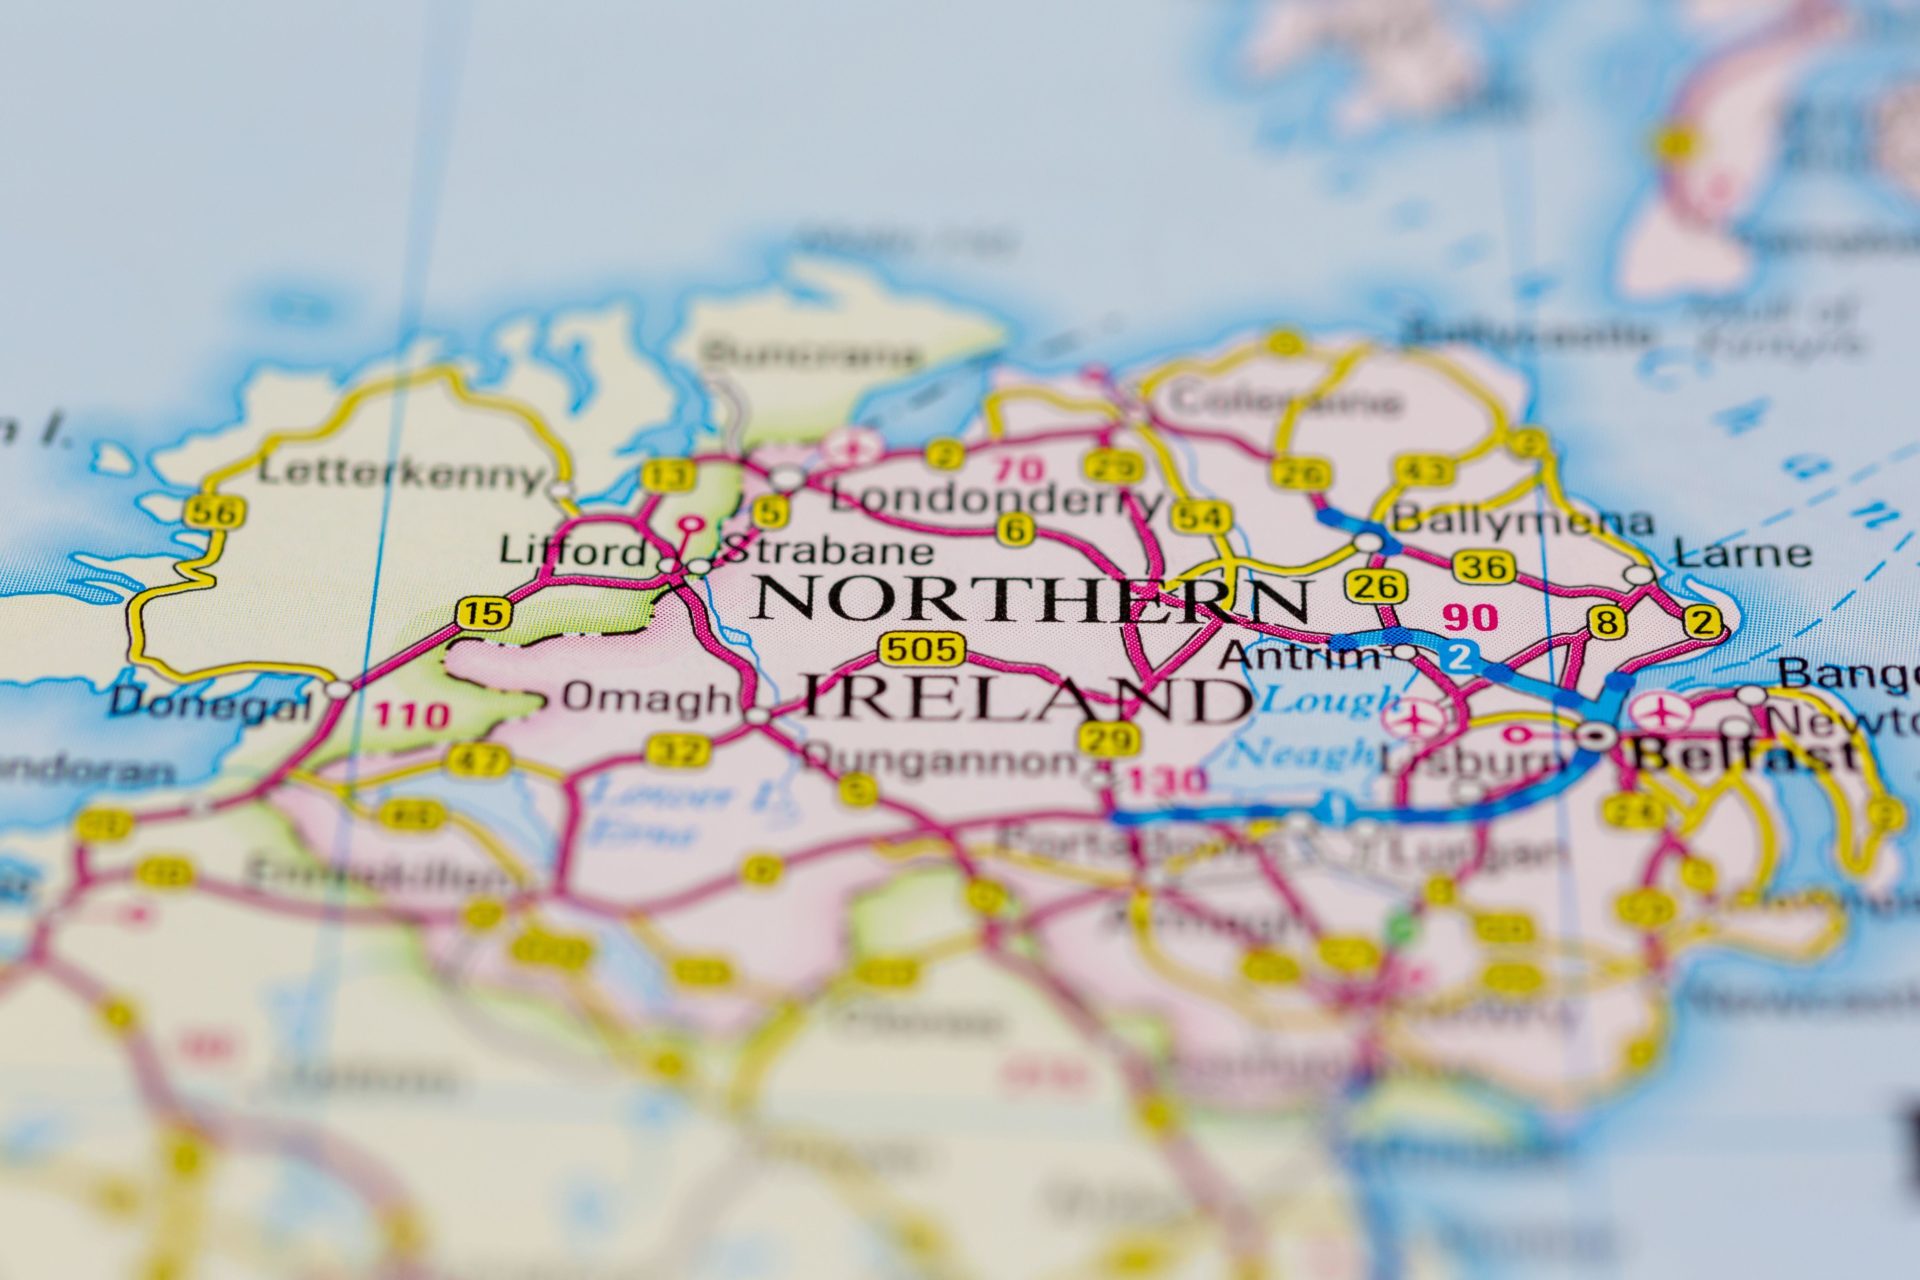 Northern Ireland is shown on a map, 19-3-21